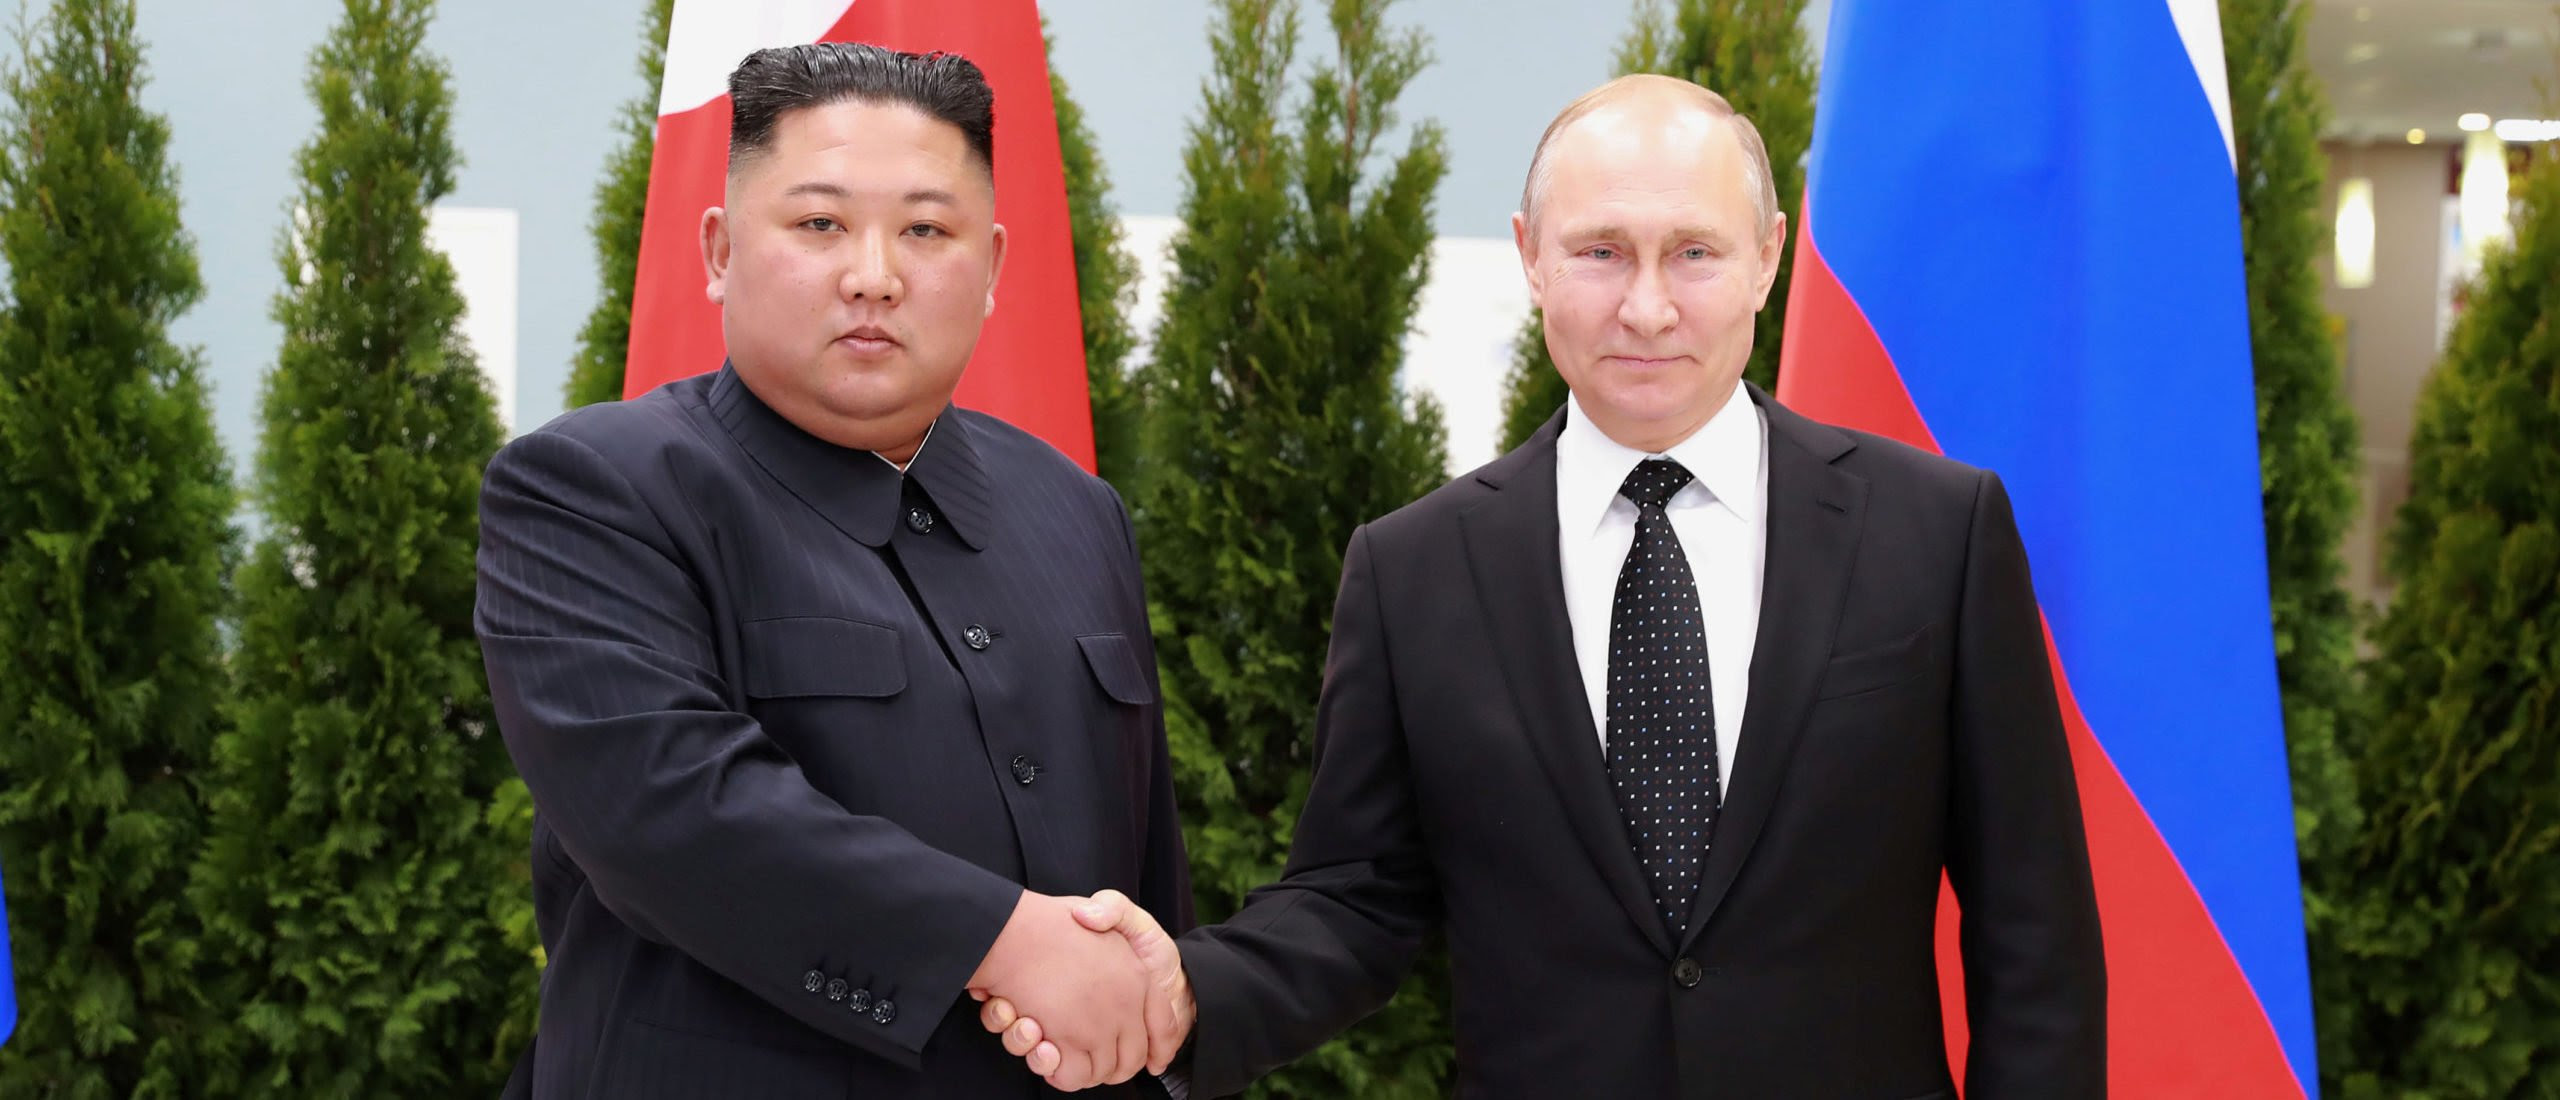 REPORT: North Korea Offers 100,000 Troops For Putin’s War On Ukraine, Russian State TV Says